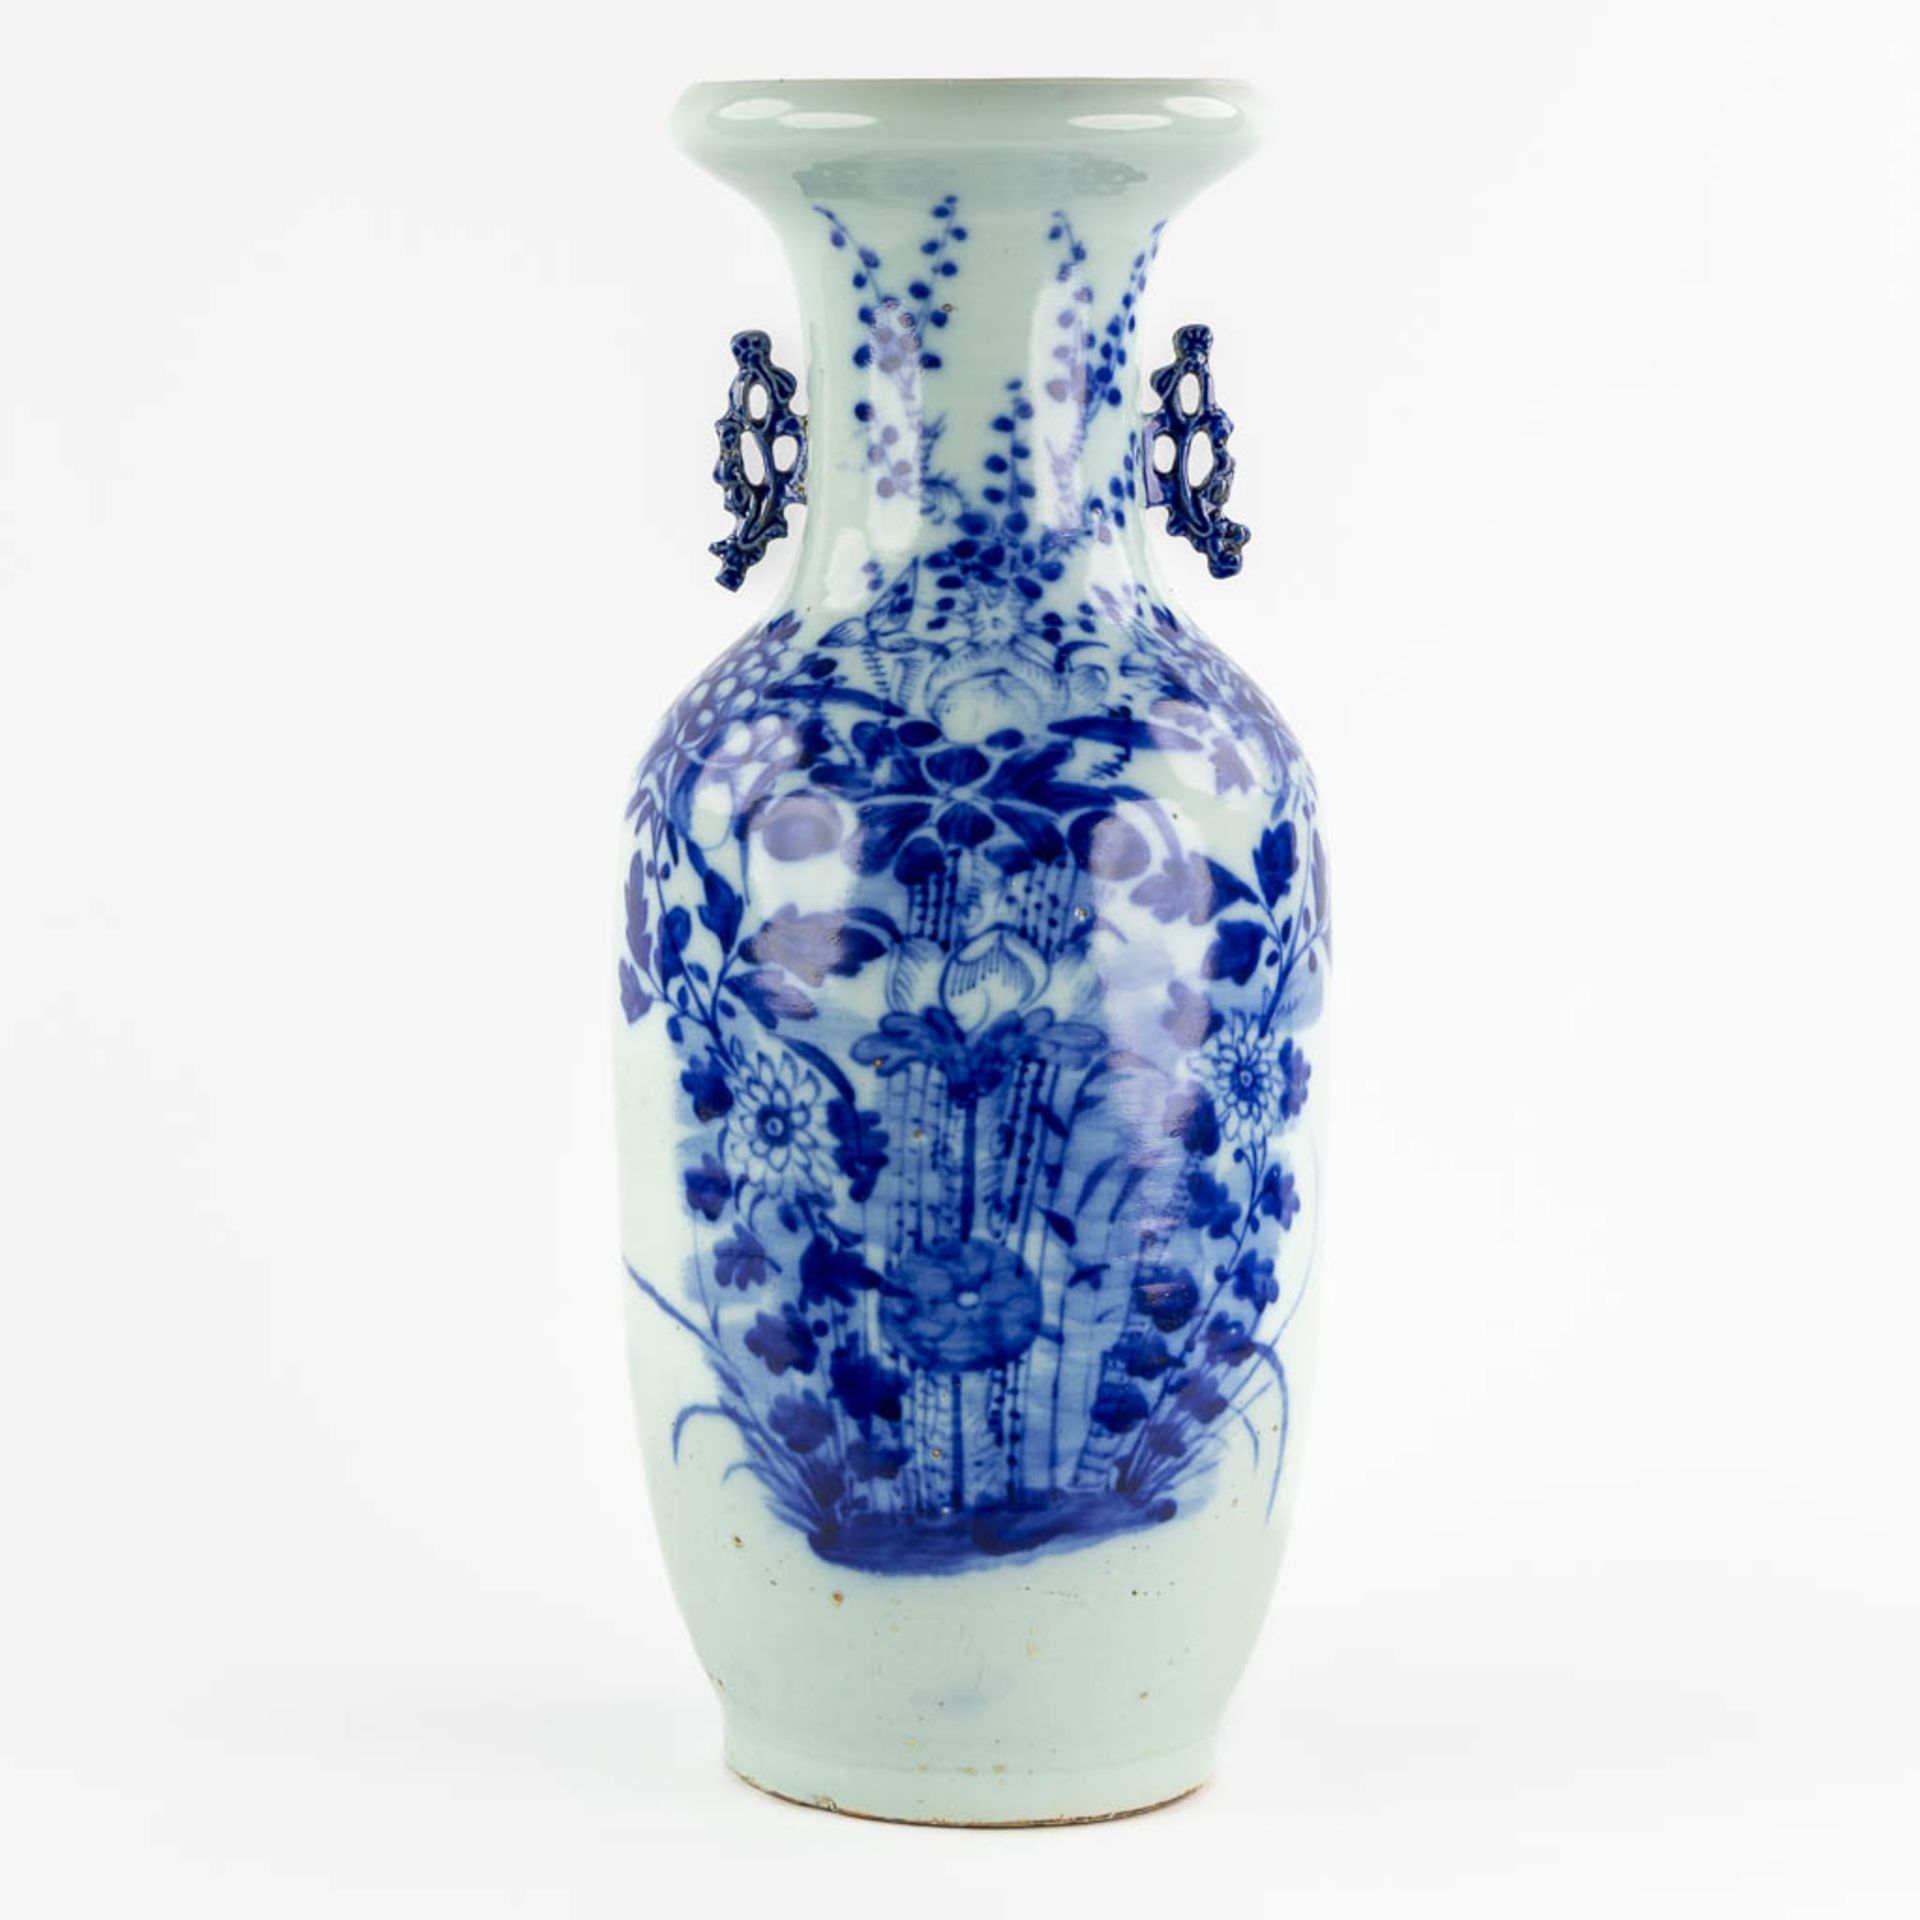 A Chinese Celadon vase with a blue-white fauna and flora decor. 19th/20th C. (H:58 x D:24 cm)